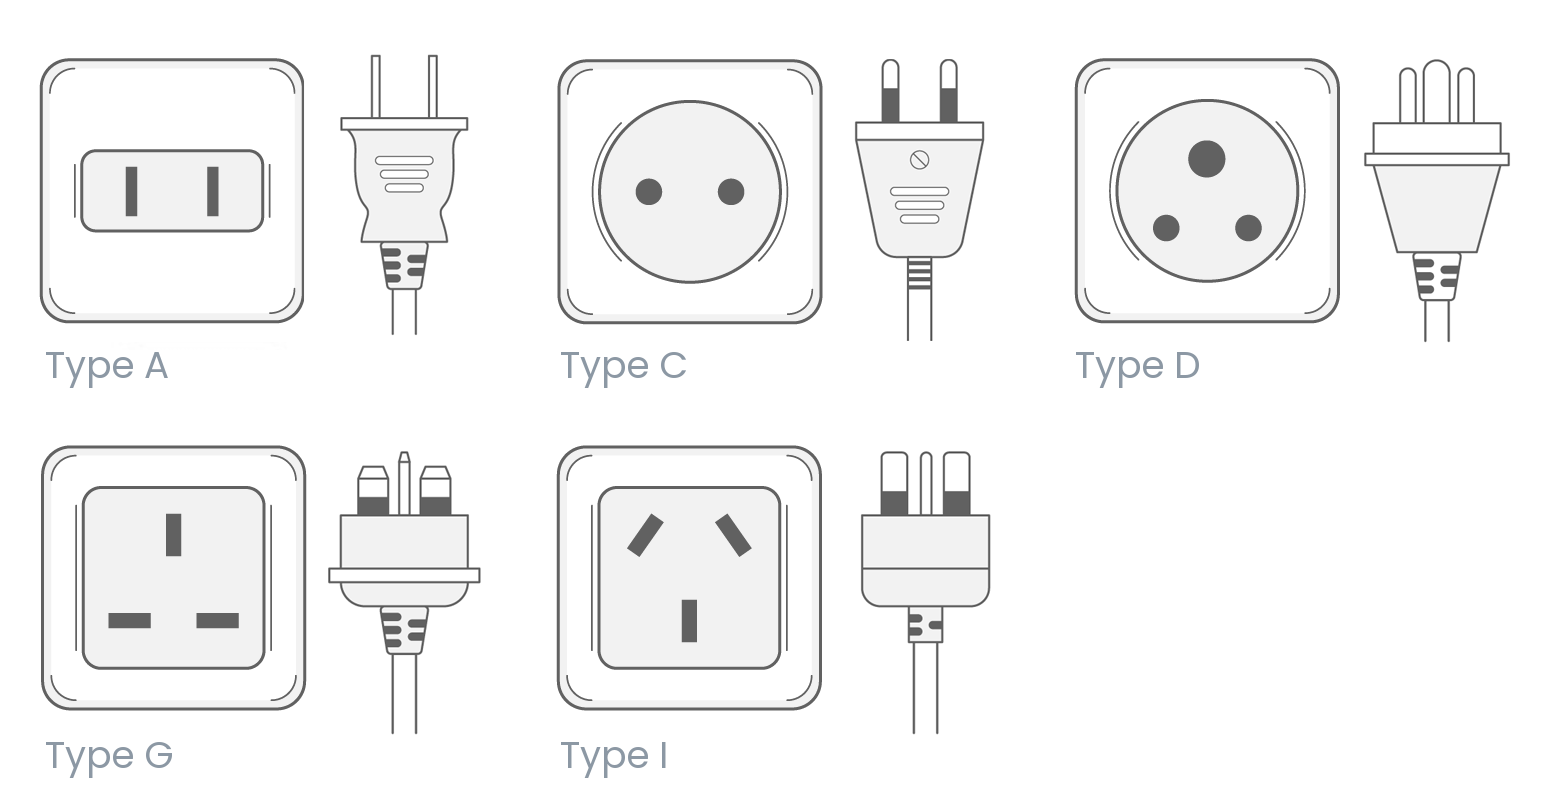 Myanmar-Burma electrical outlets and plug types